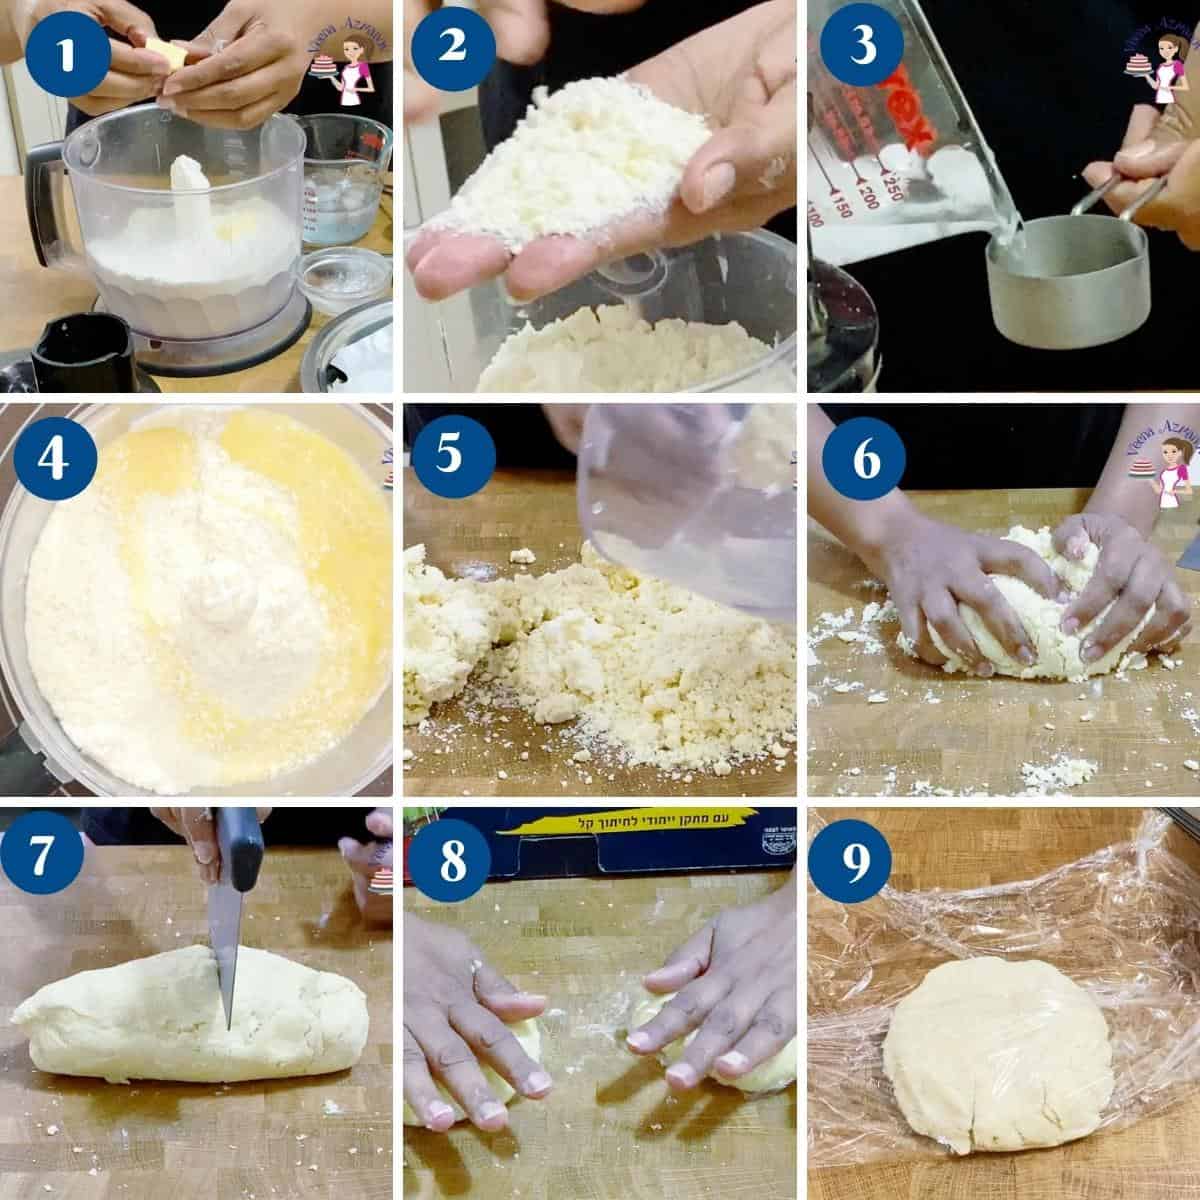 Progress pictures collage making the pie crust dough.